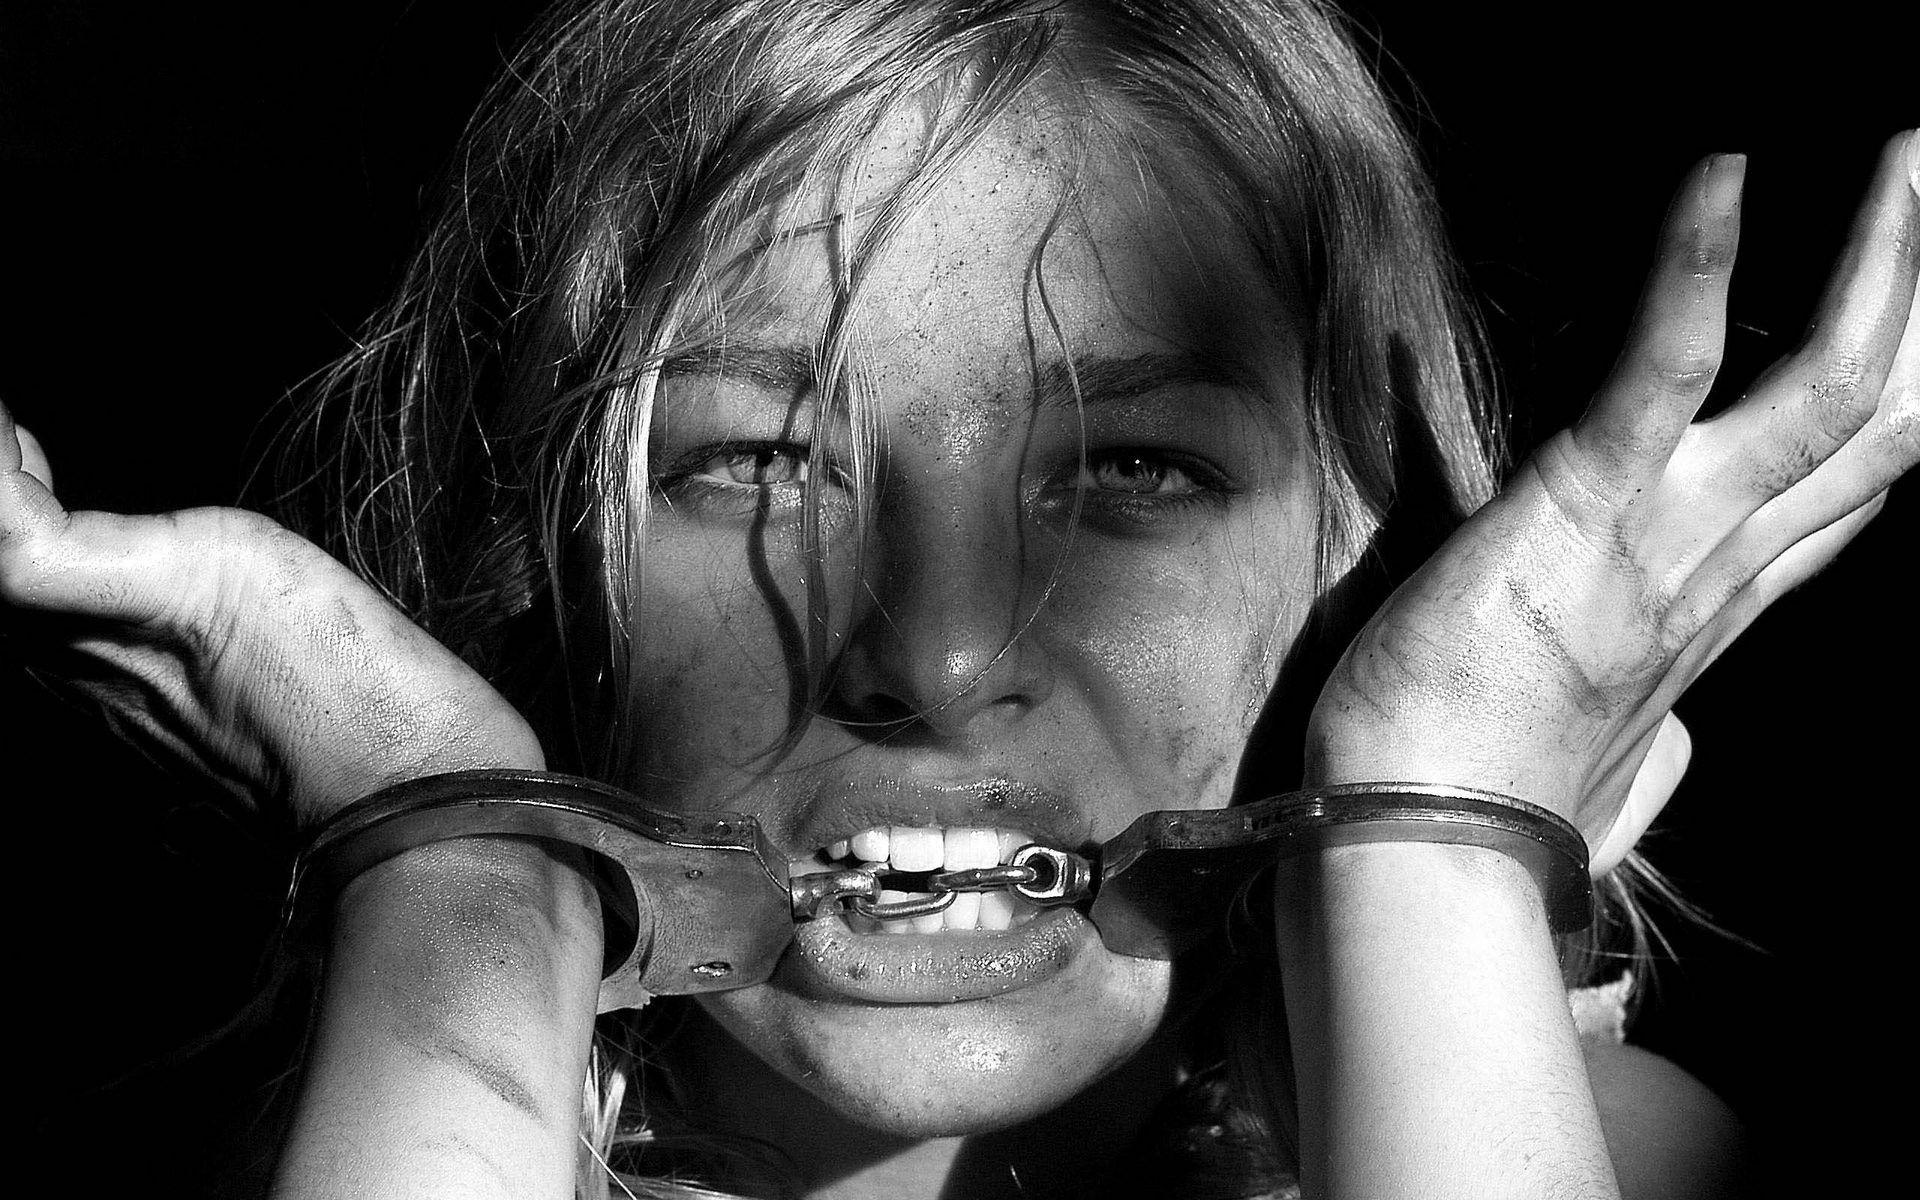 blondes, women, models, people, grayscale, handcuffs, faces